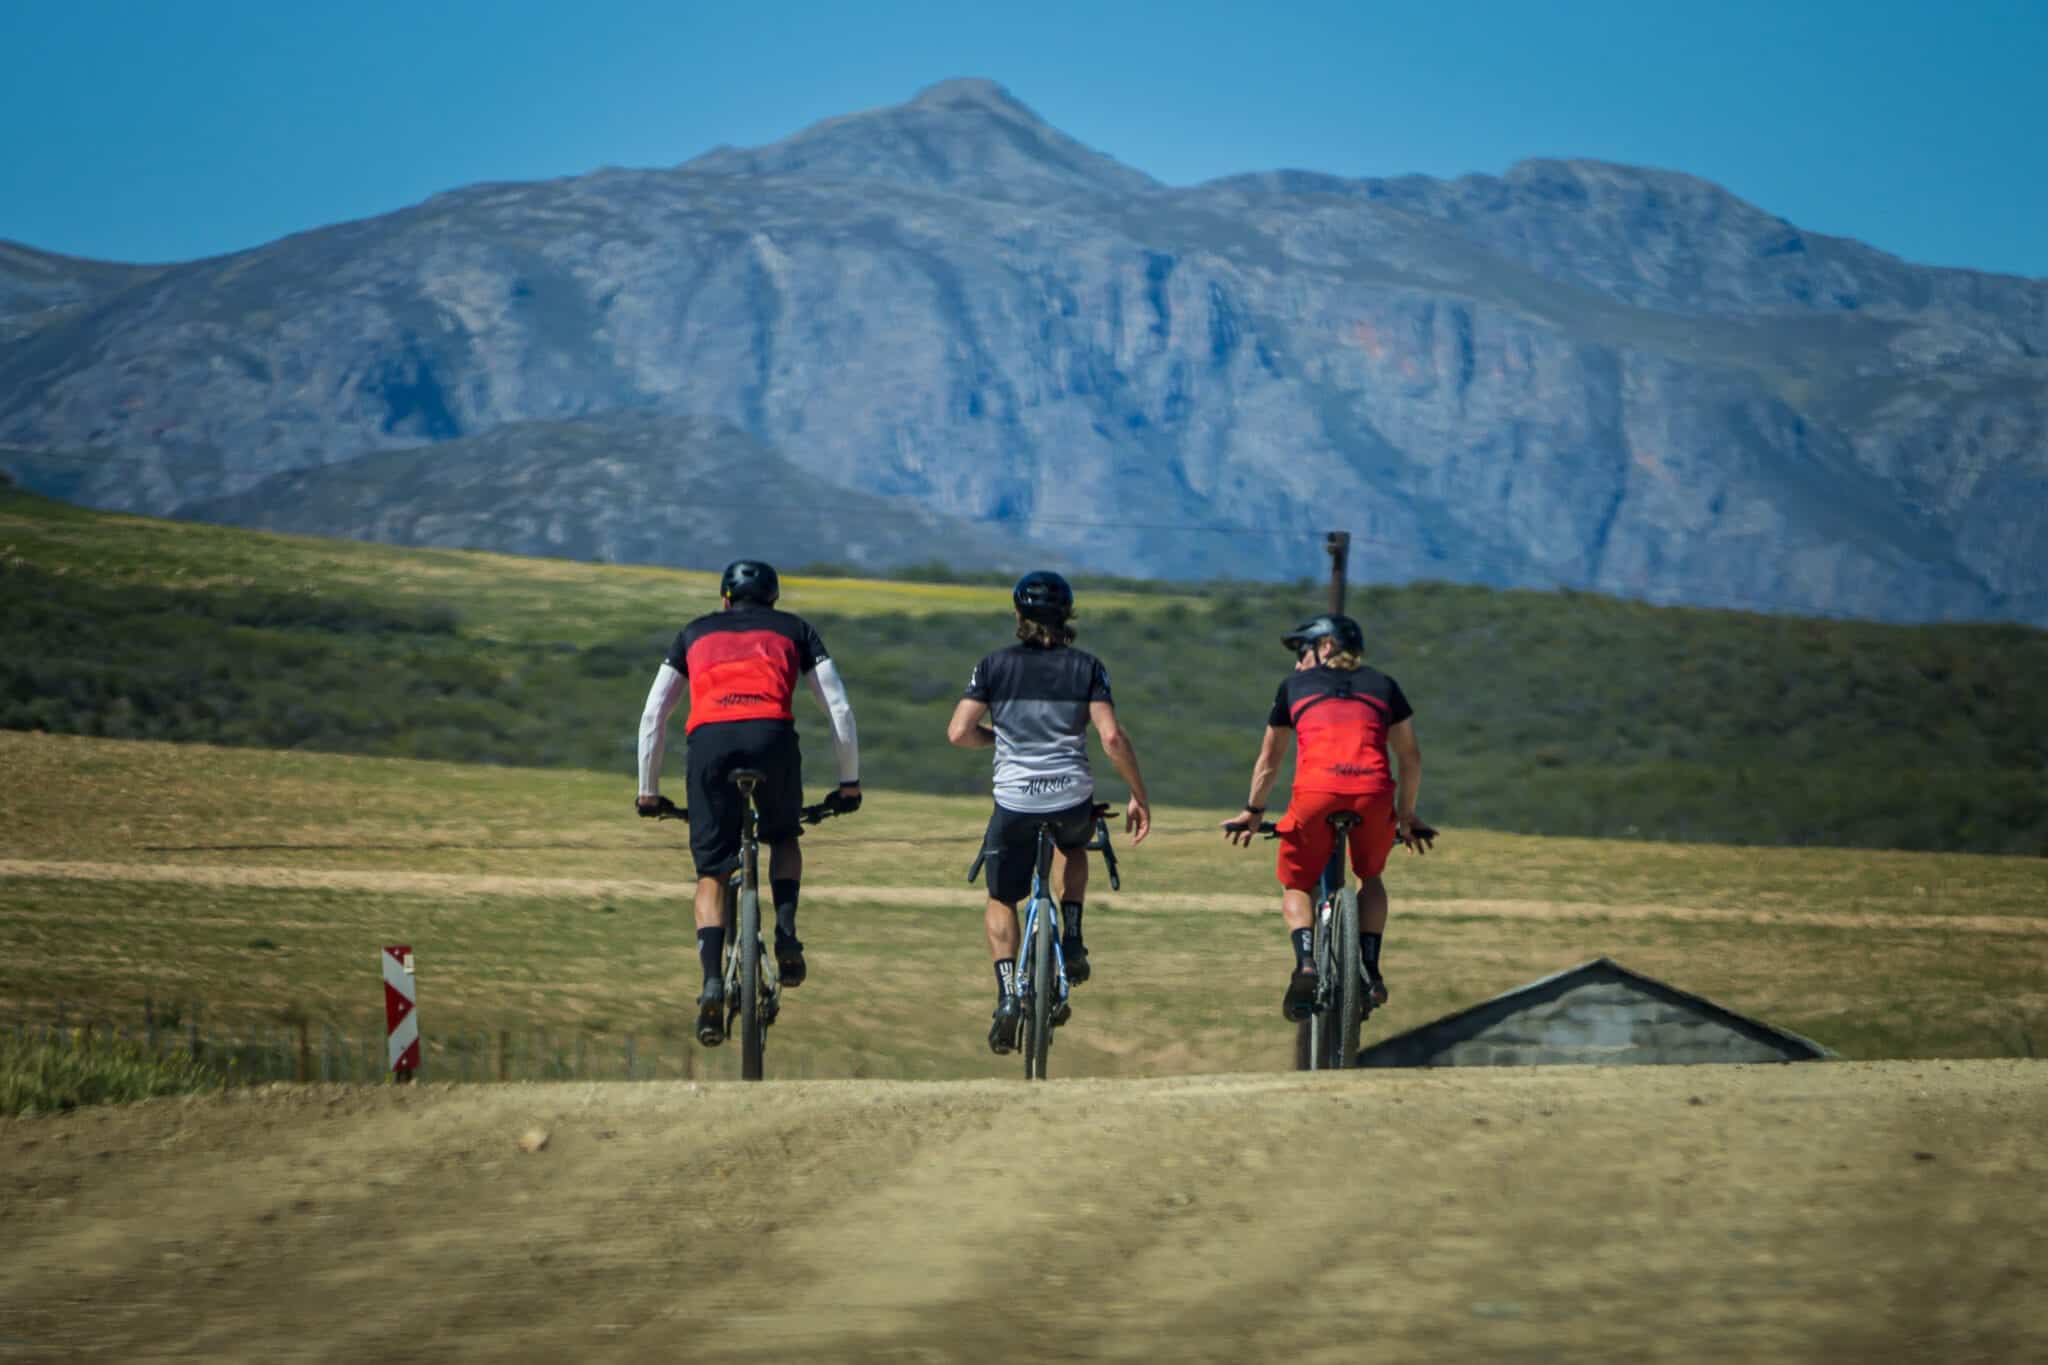 The WILD AIR Crew Takes On The Karoo Crossing – How Gravel Can We go?